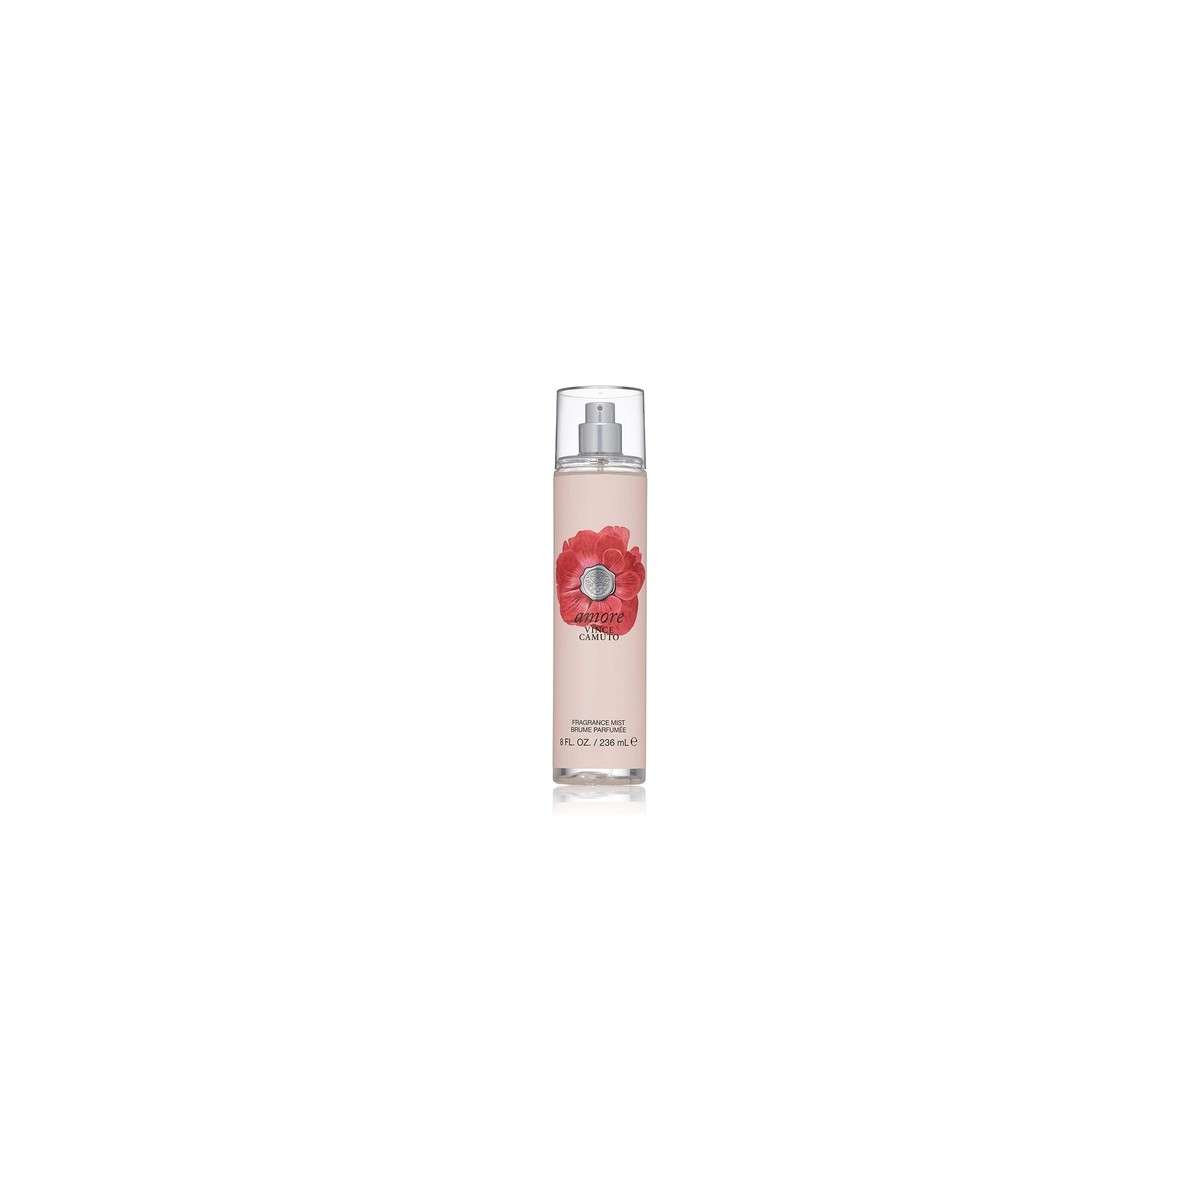 Vince Camuto Amore Body Mist for Women 240ml